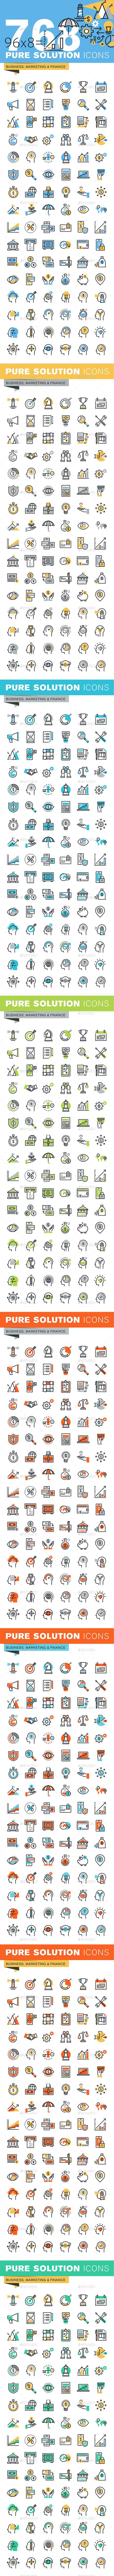 Set of Thin Line Flat Design Icons of Business and Finance